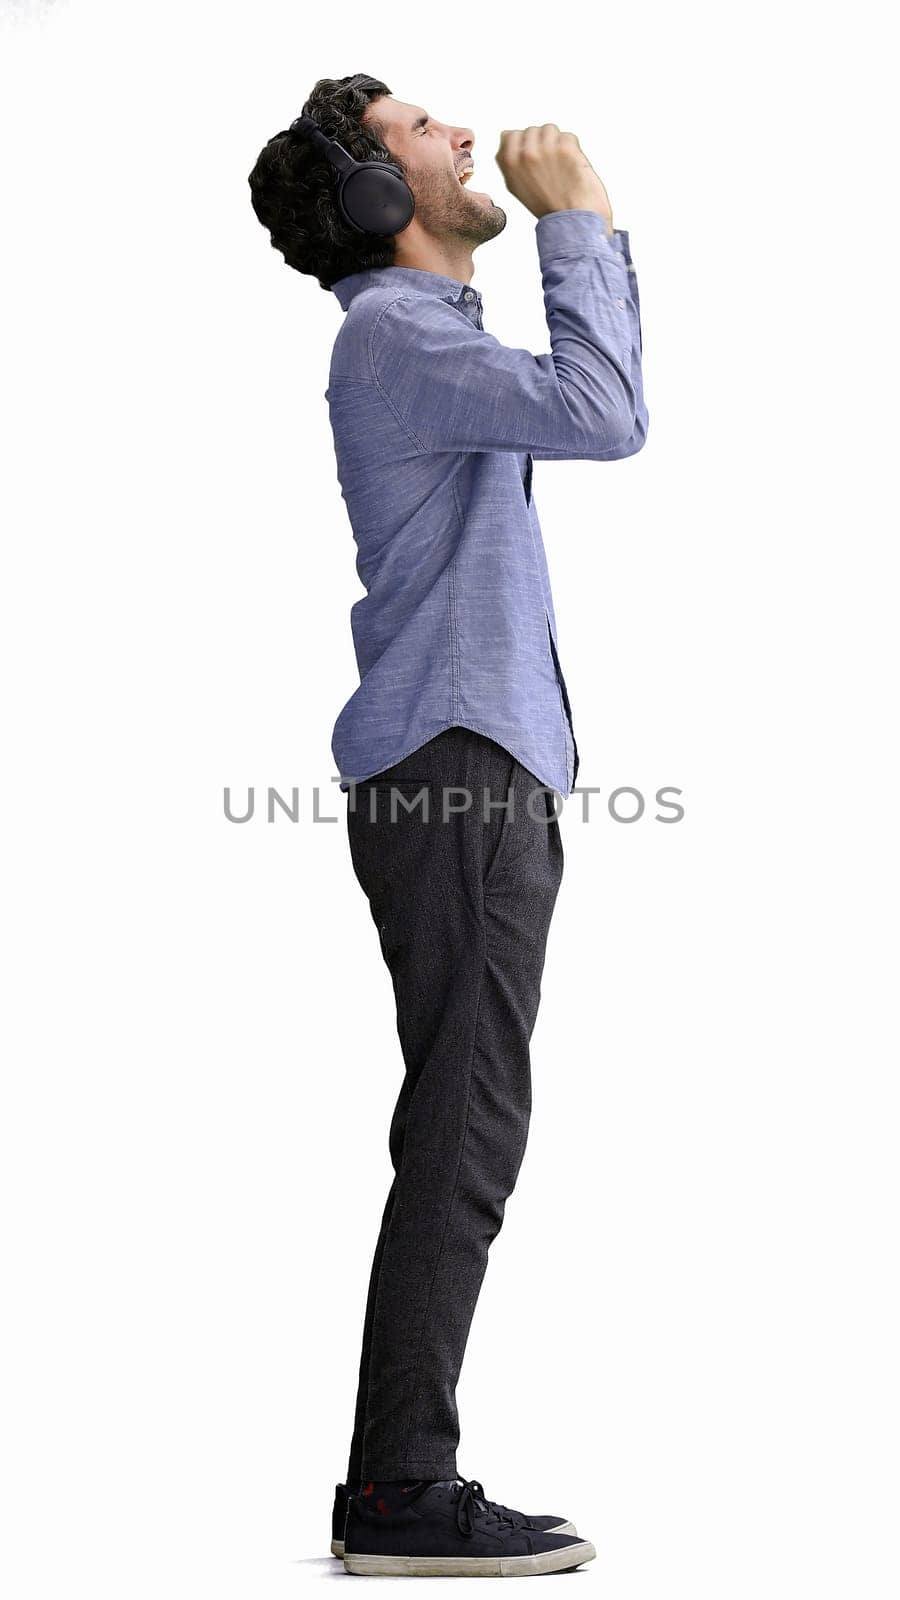 man in full growth. isolated on white background wearing headphones dancing by Prosto